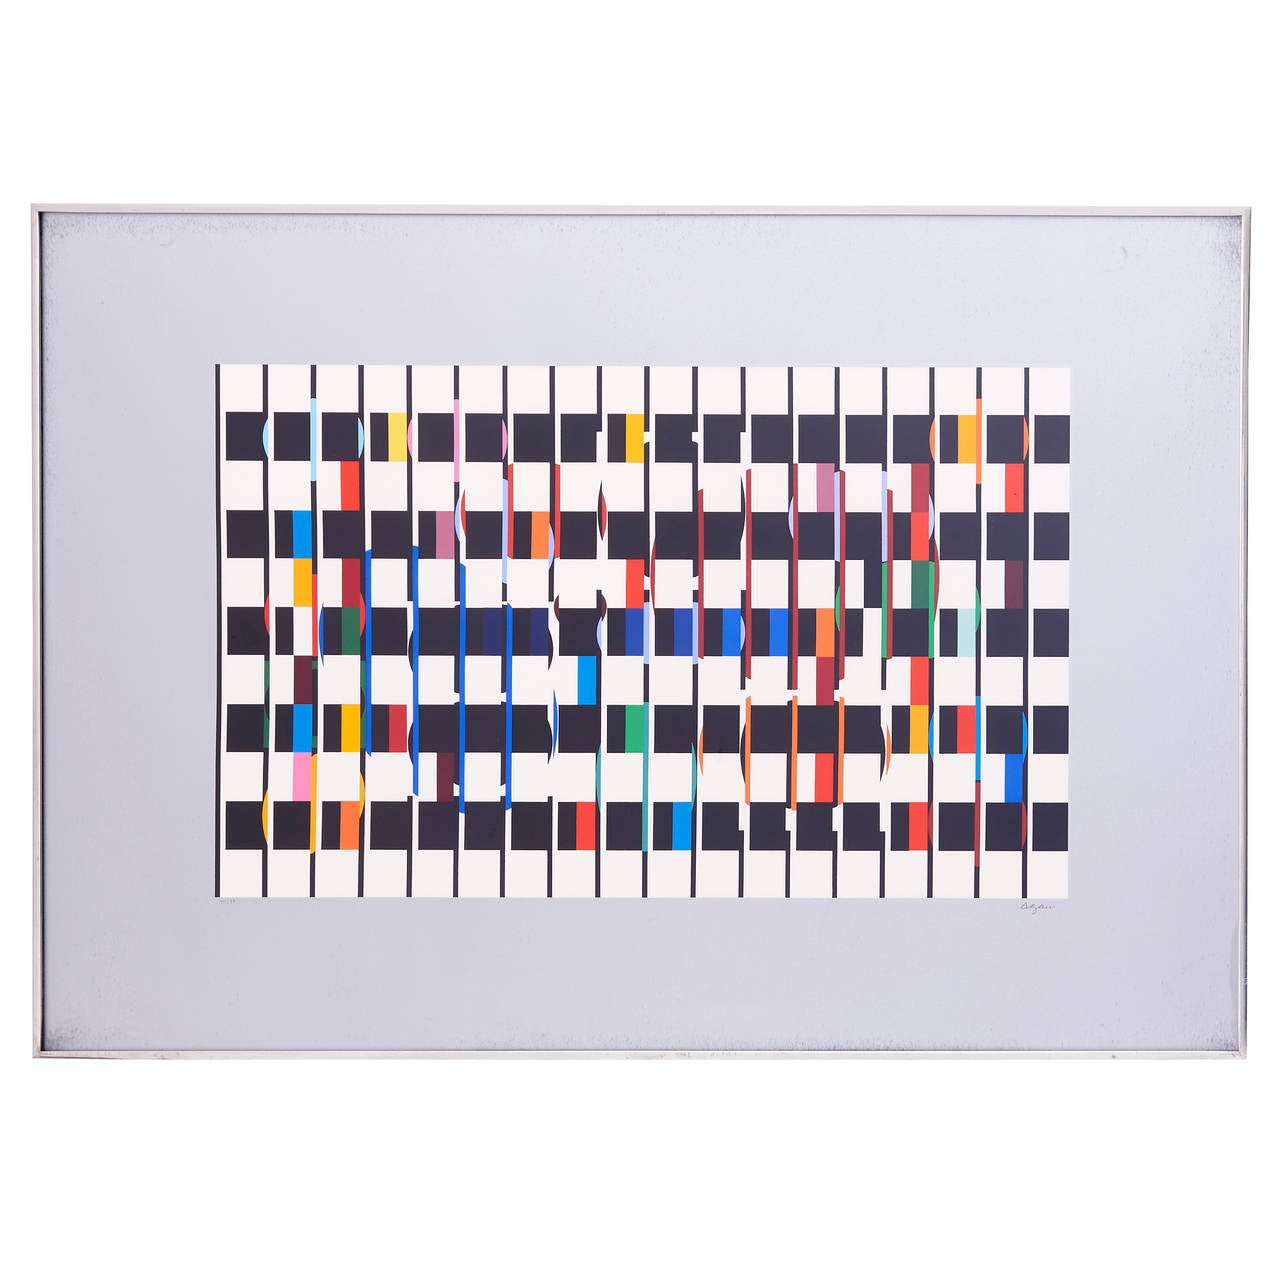 Unusual Yaacov Agam Serigraph "One and Another 2" Signed, Numbered & Dated  1979 For Sale